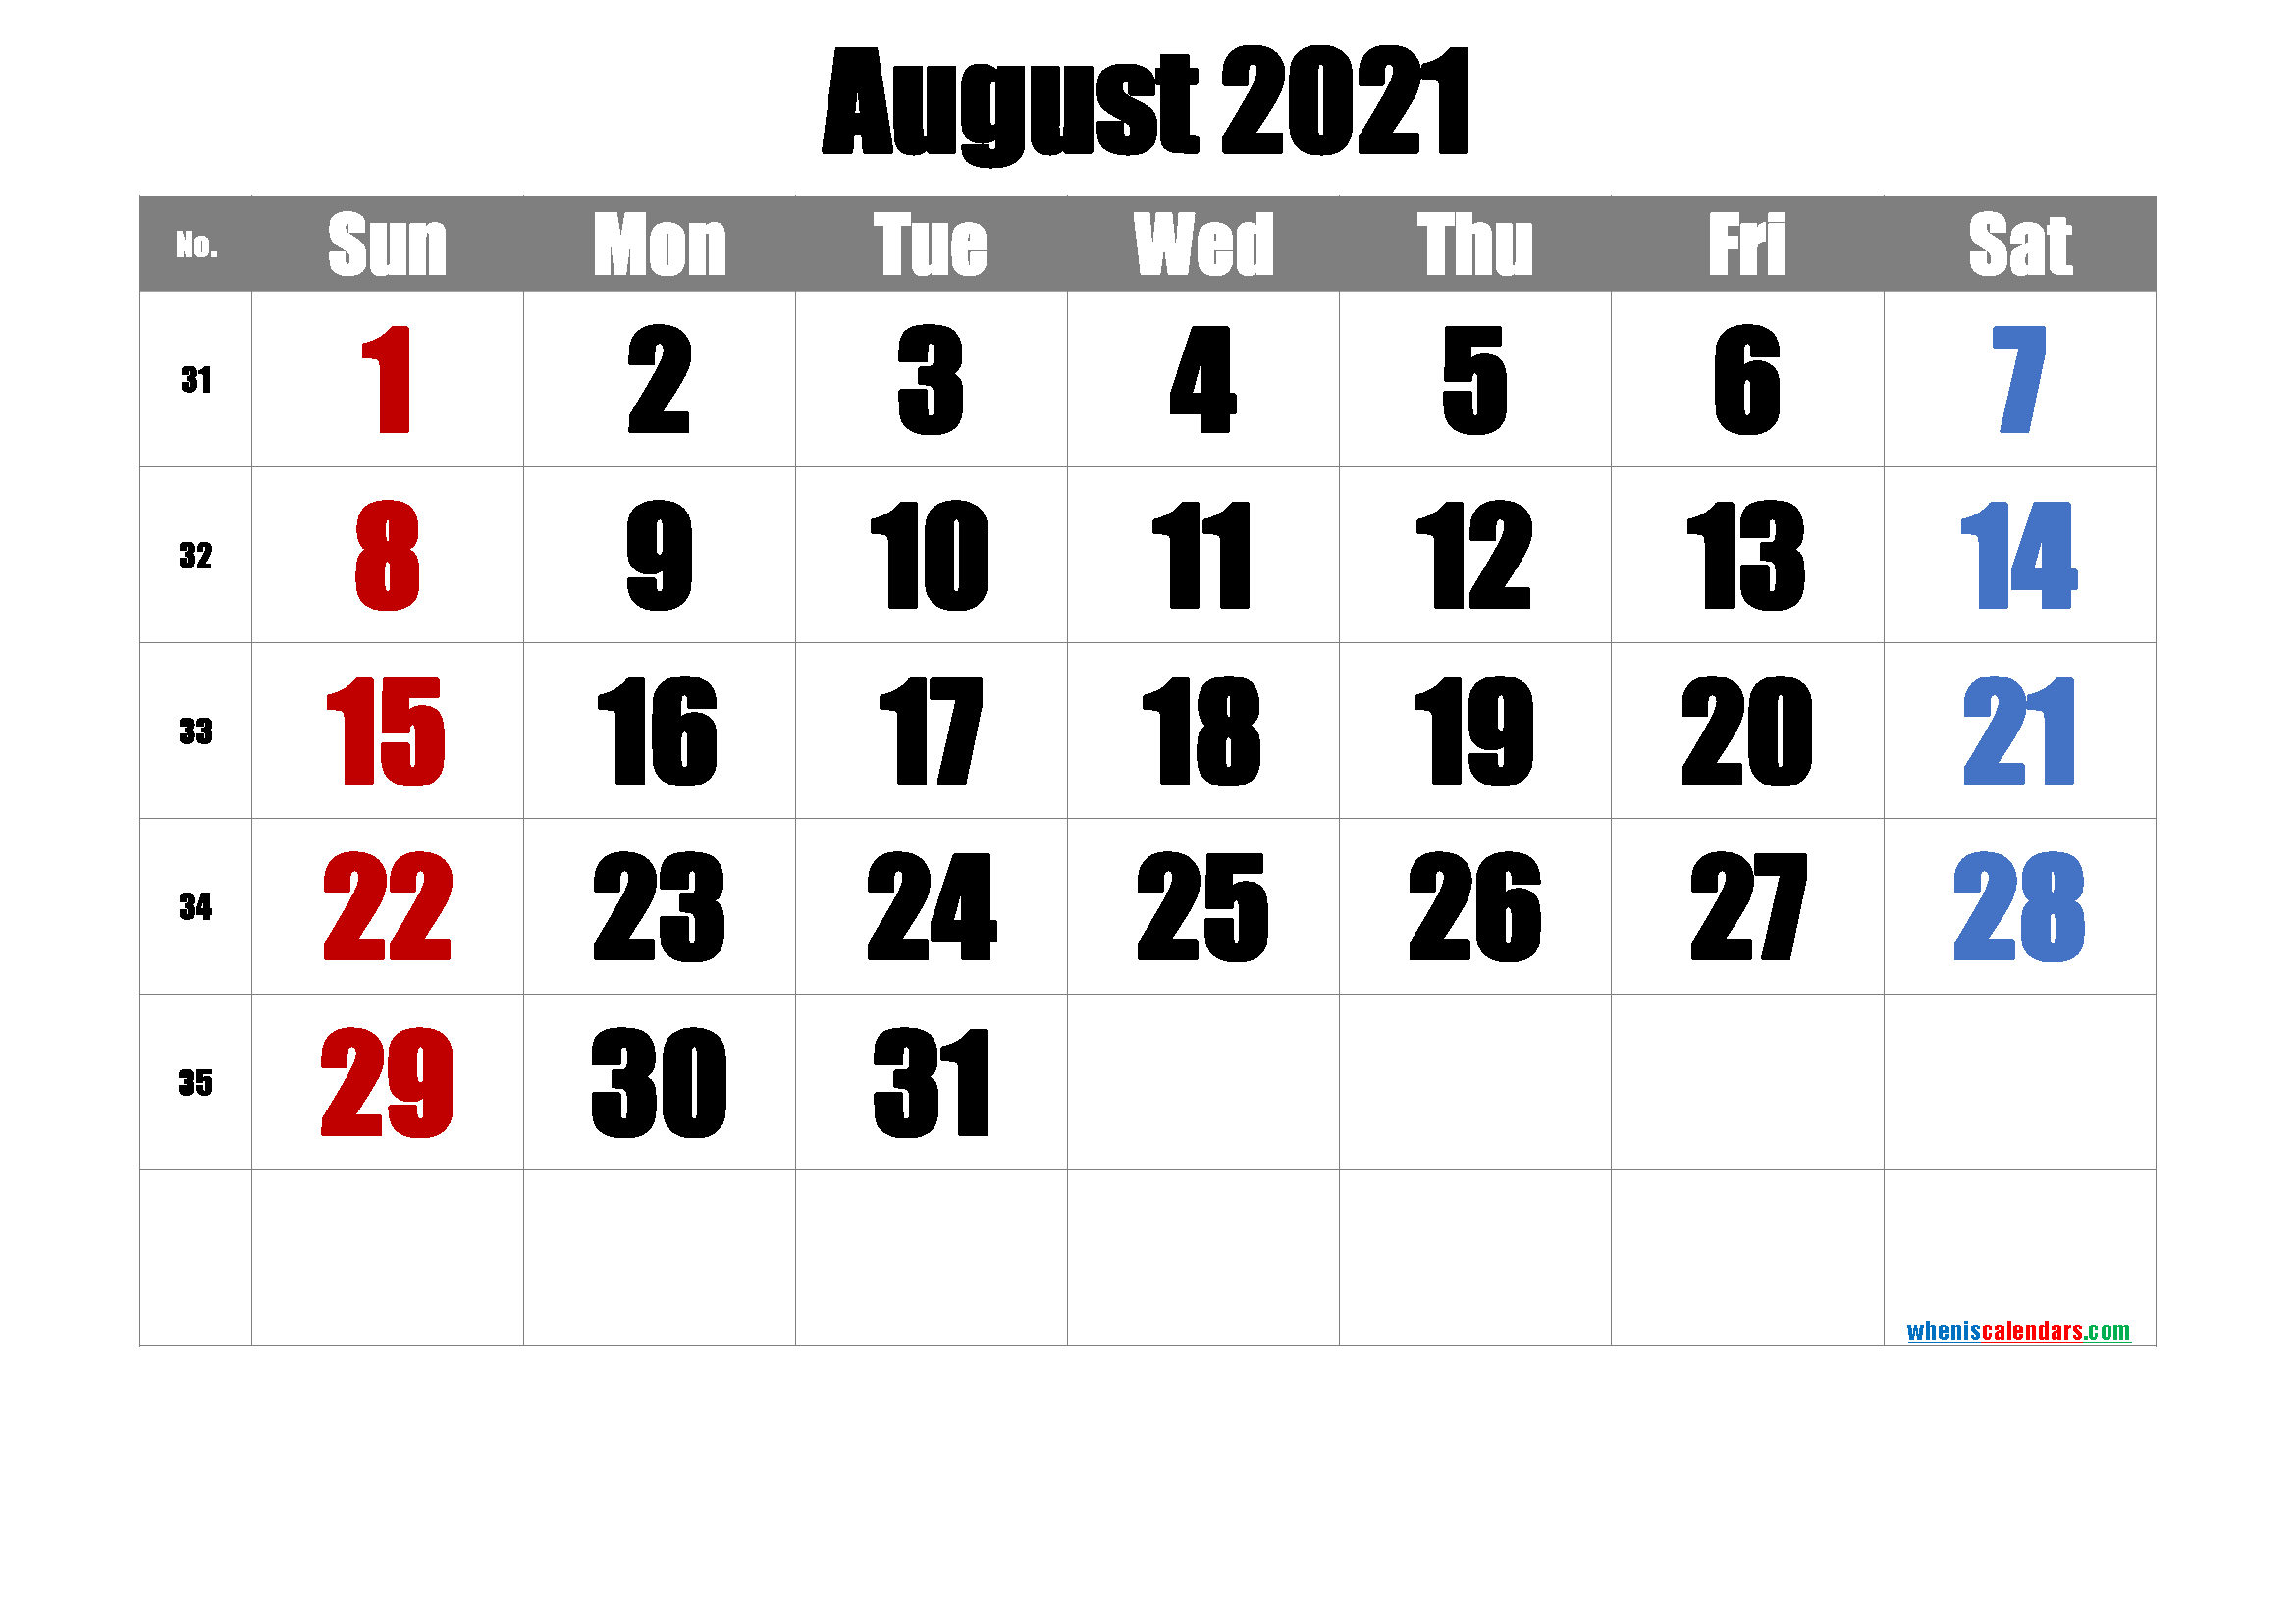 49 How Many Weeks From July 2021 To January 2022 | Octo